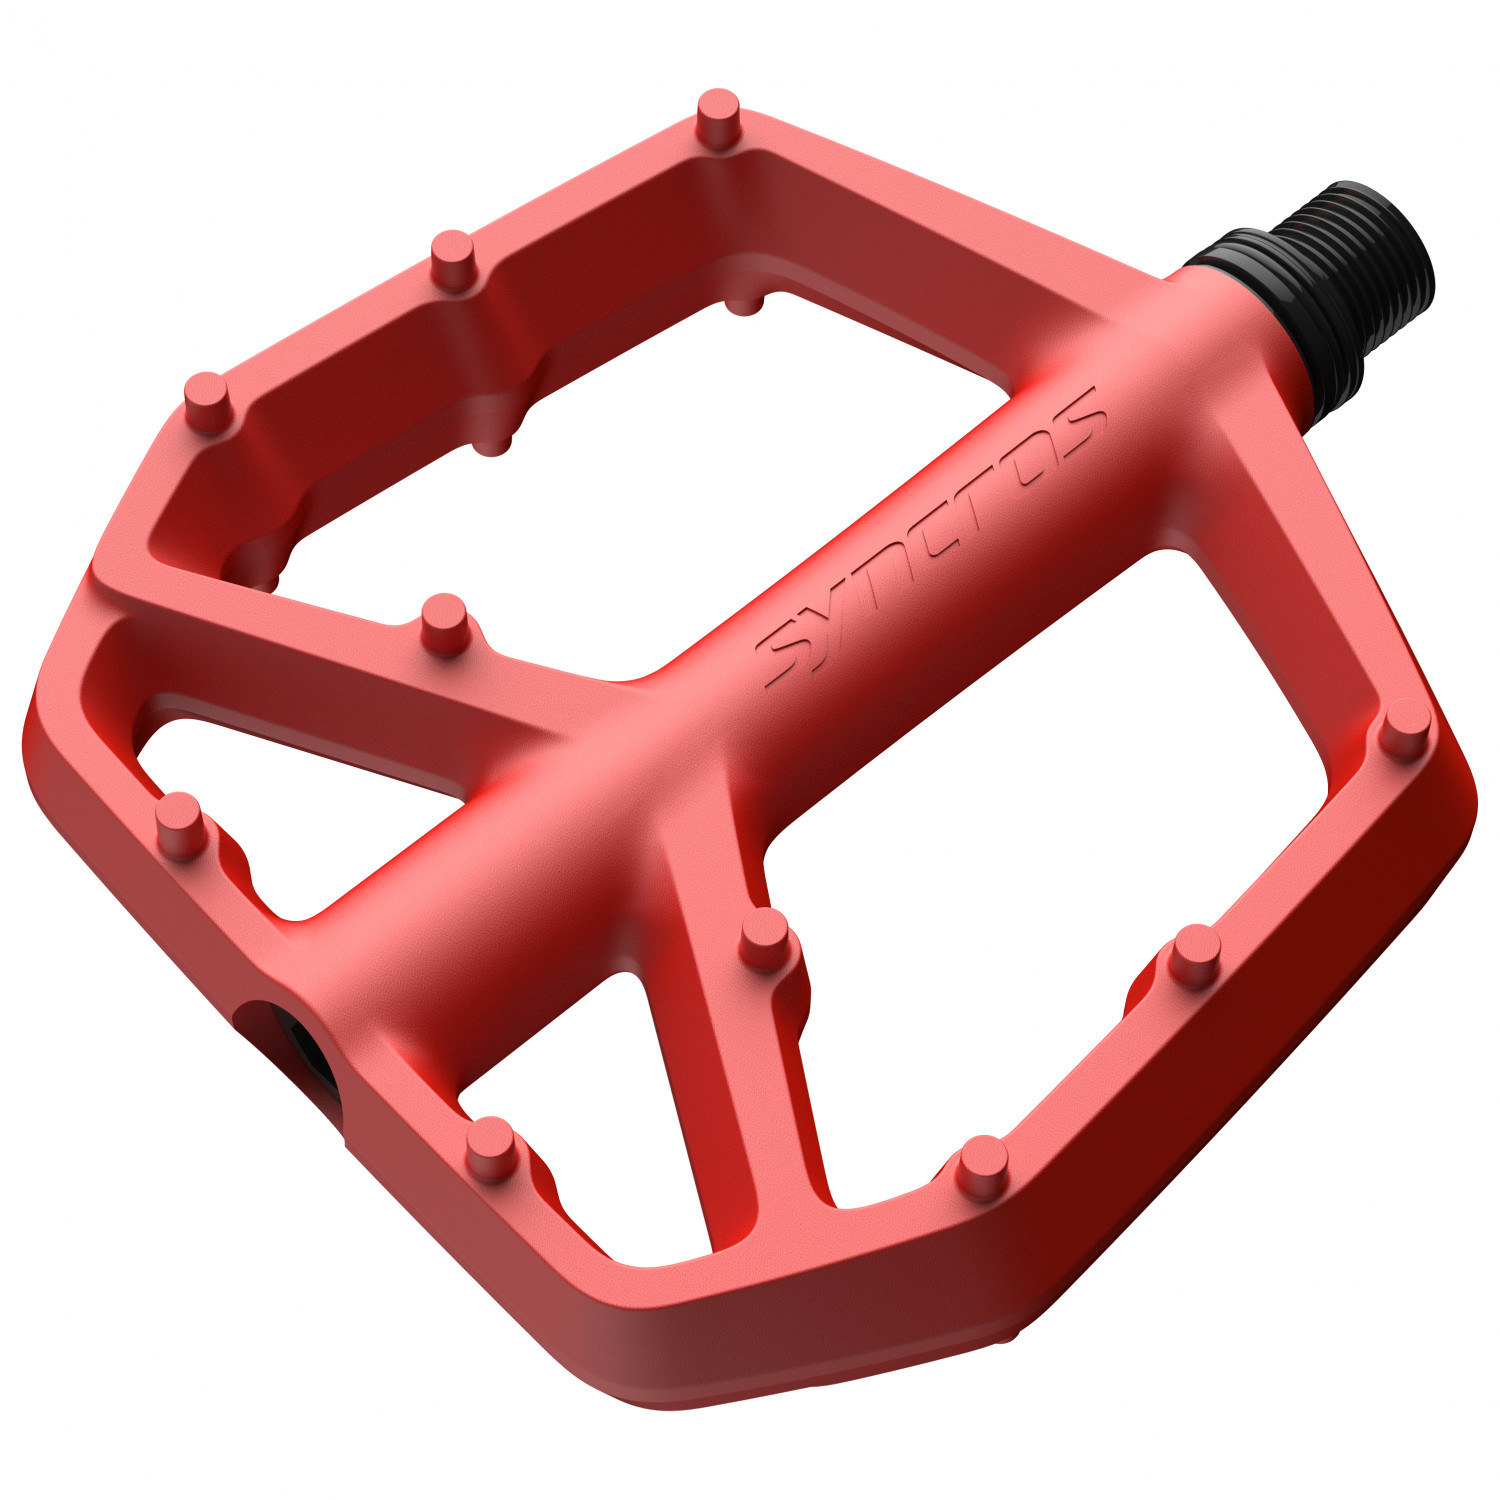 Педали платформы Syncros Flat Pedals Squamish III, цвет Florida Red nylon bicycle pedals ultralight flat platform bike pedals for mountain bike 9 16 1 2 cycling sealed du bearing pedals